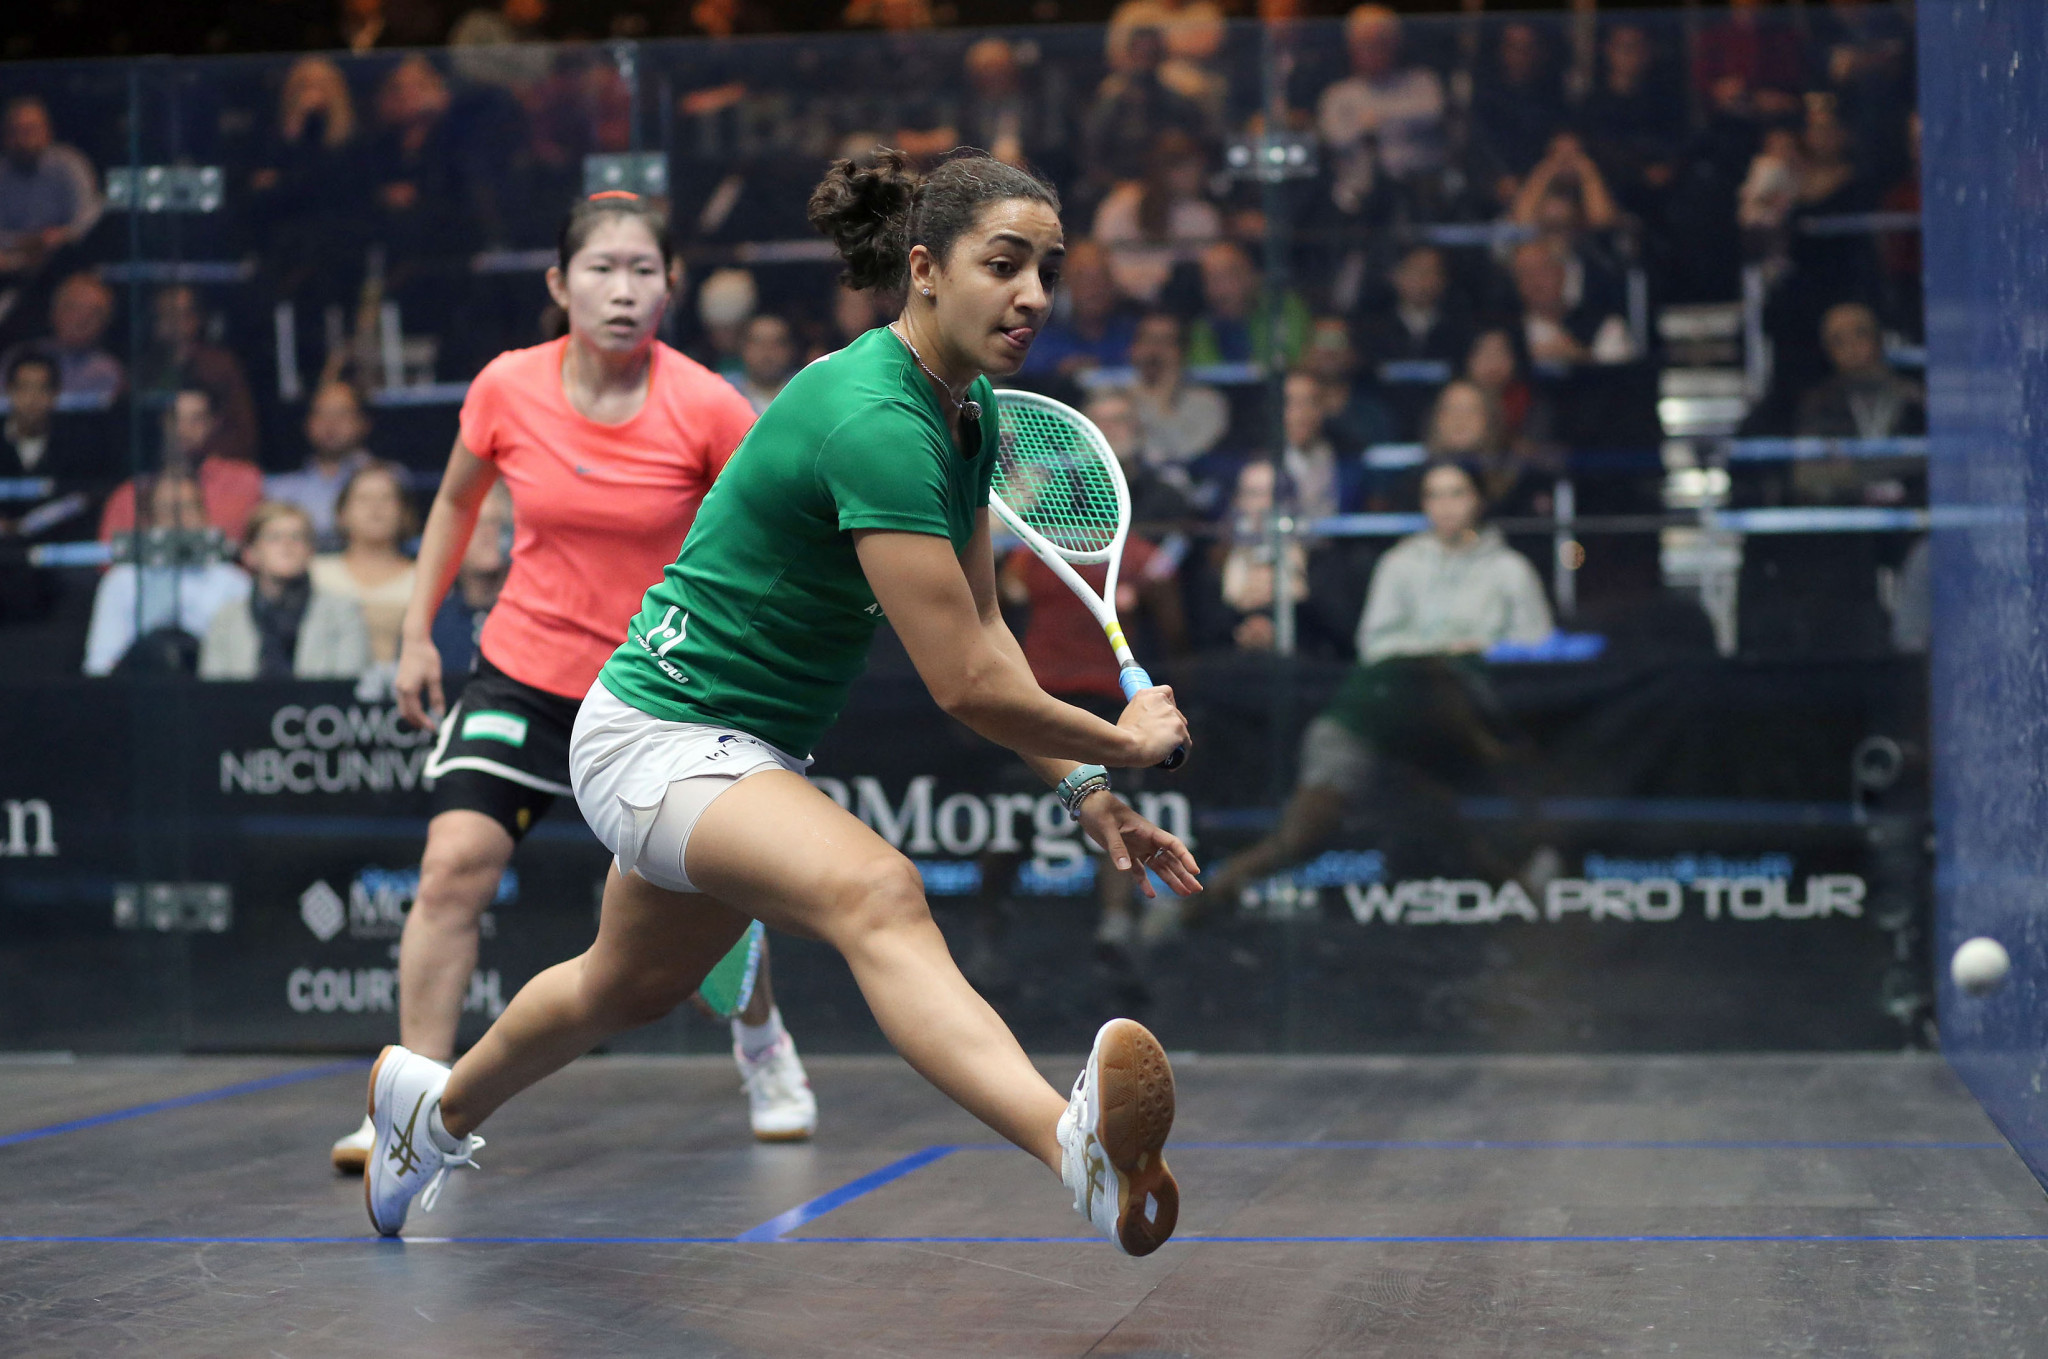 Top women's seed Raneem El Welily of Egypt comfortably made the last eight ©PSA